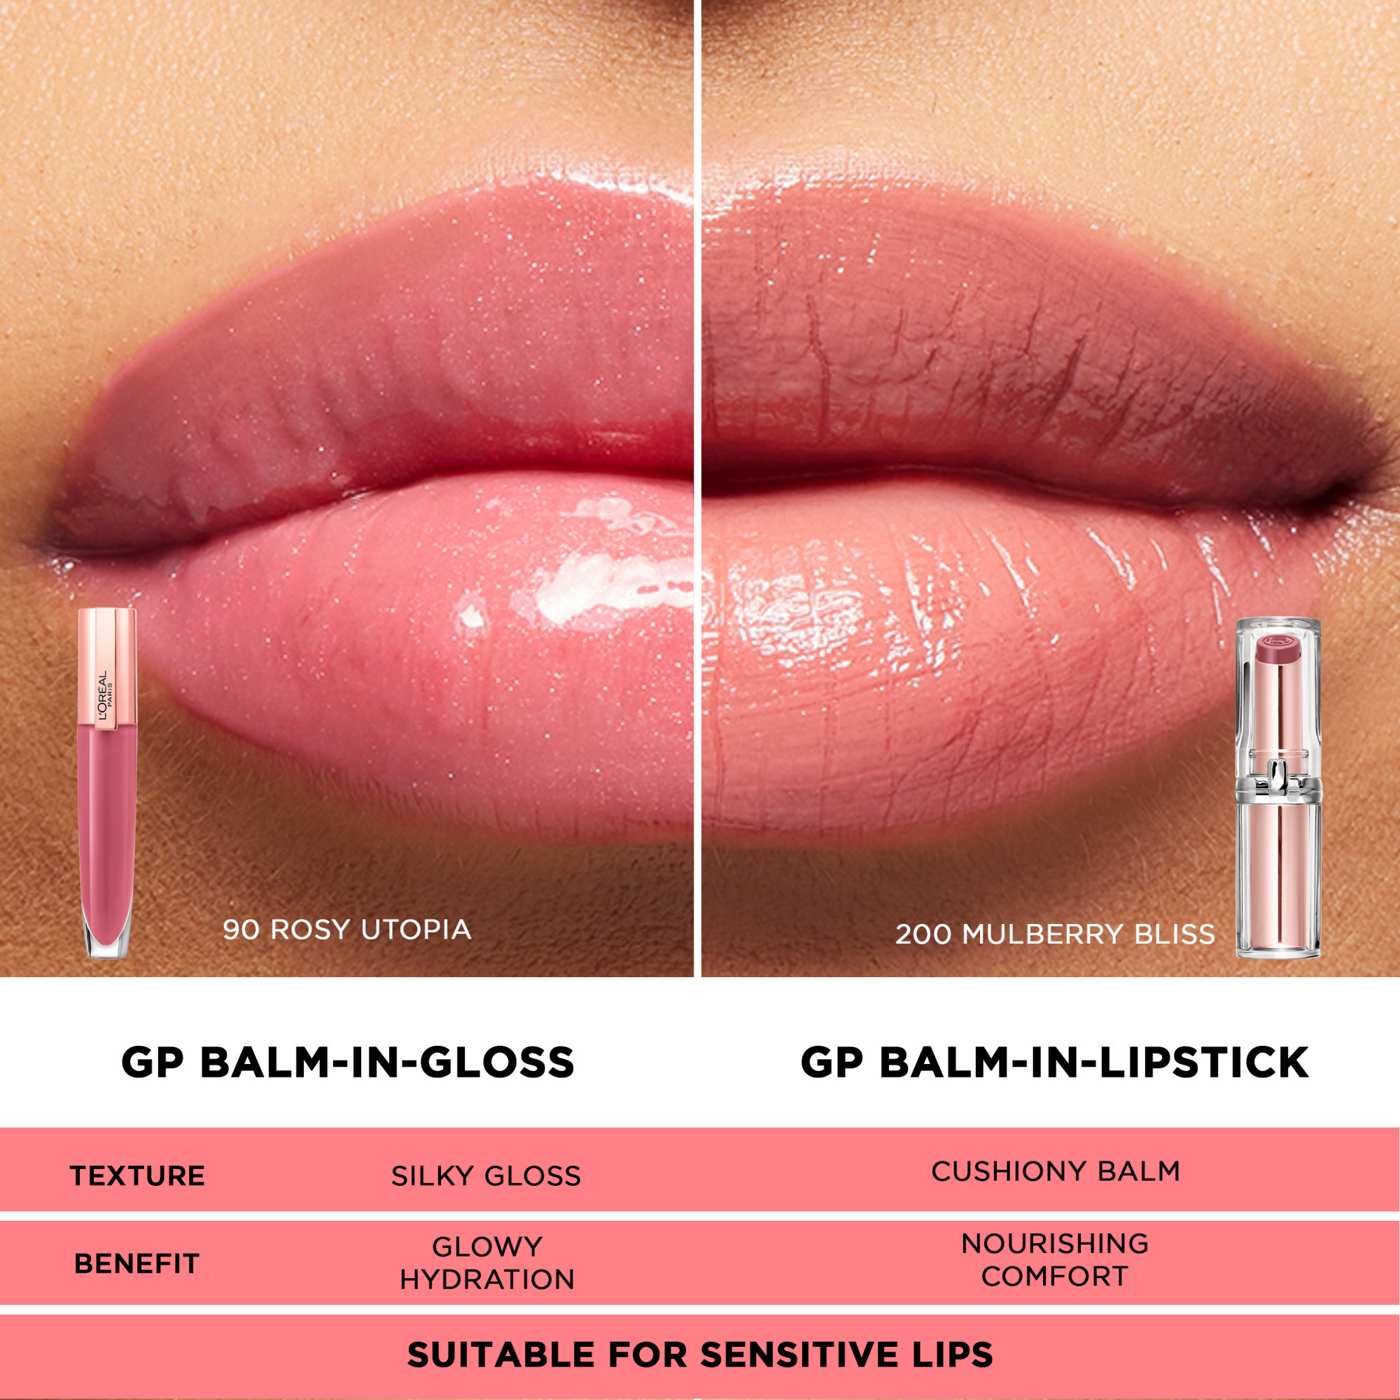 L'Oréal Paris Glow Paradise  Lip Balm-in-Gloss Pomegranate Extract Rosy Utopia; image 4 of 6